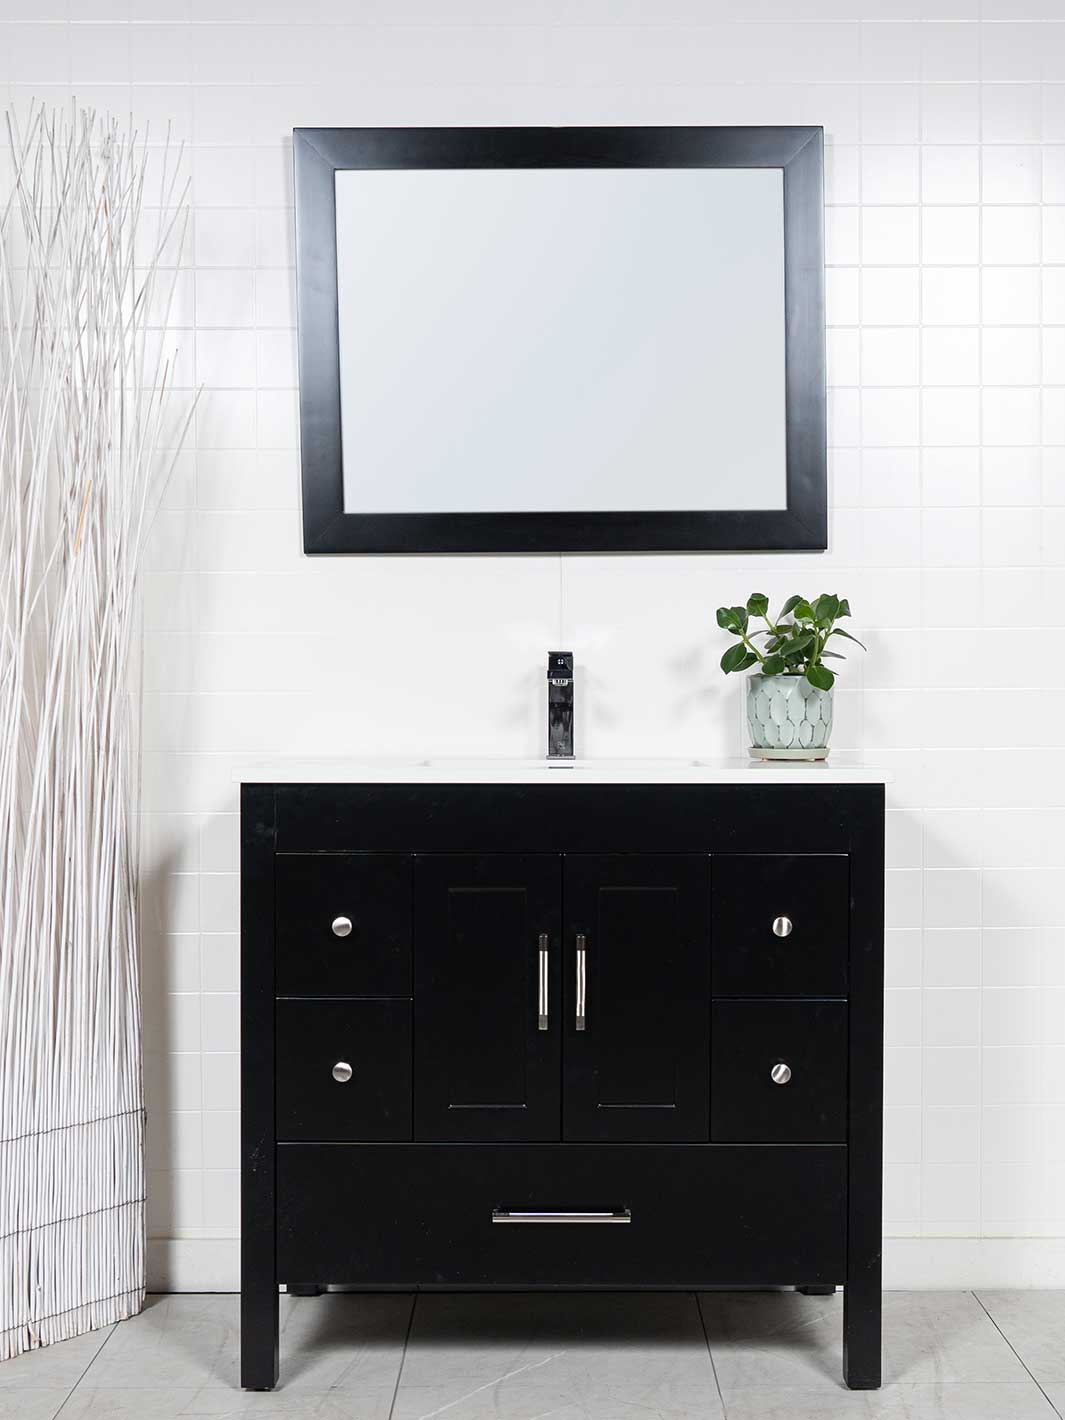 Black bathroom vanity with 5 drawers and a cupboard beneath the sink. there is a black wood framed mirror and a white quartz counter